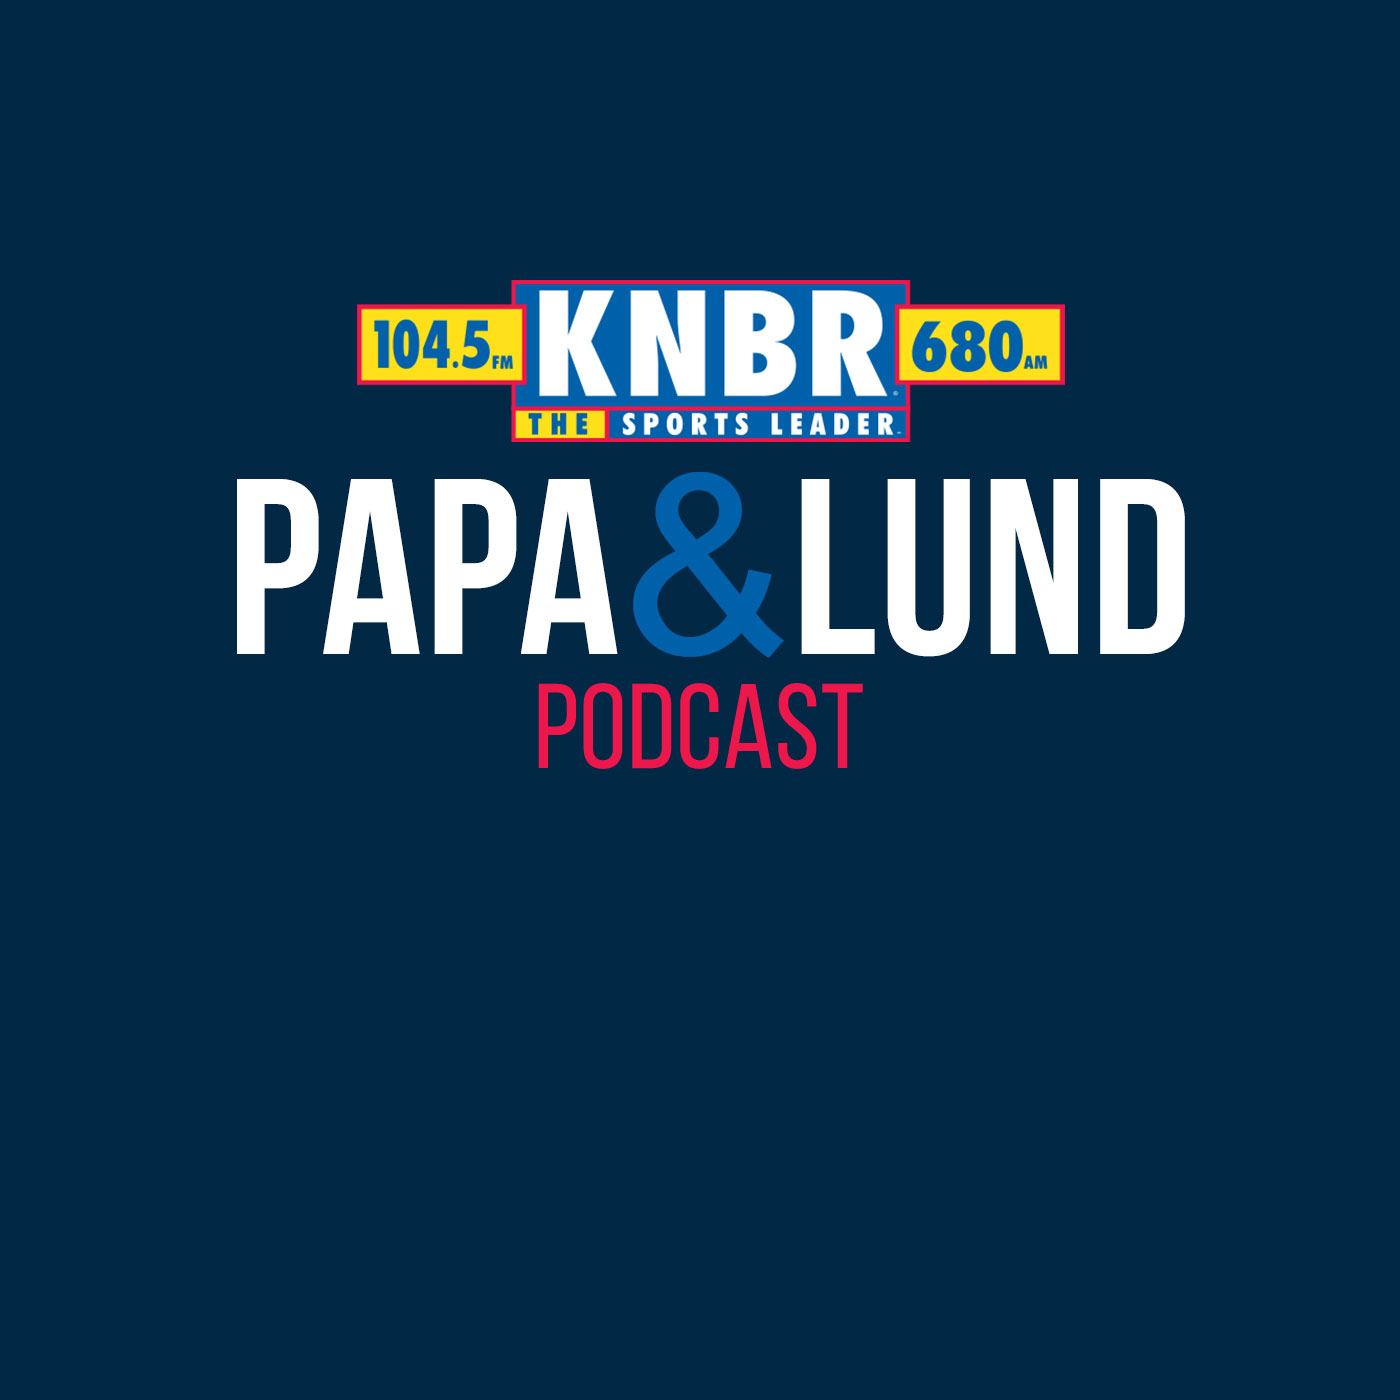 11-11 Former Warrior Big Man and NBA Champion Festus Ezeli joins Papa and Lund to talk about the parallels of this years team with the Strength In Numbers Warriors